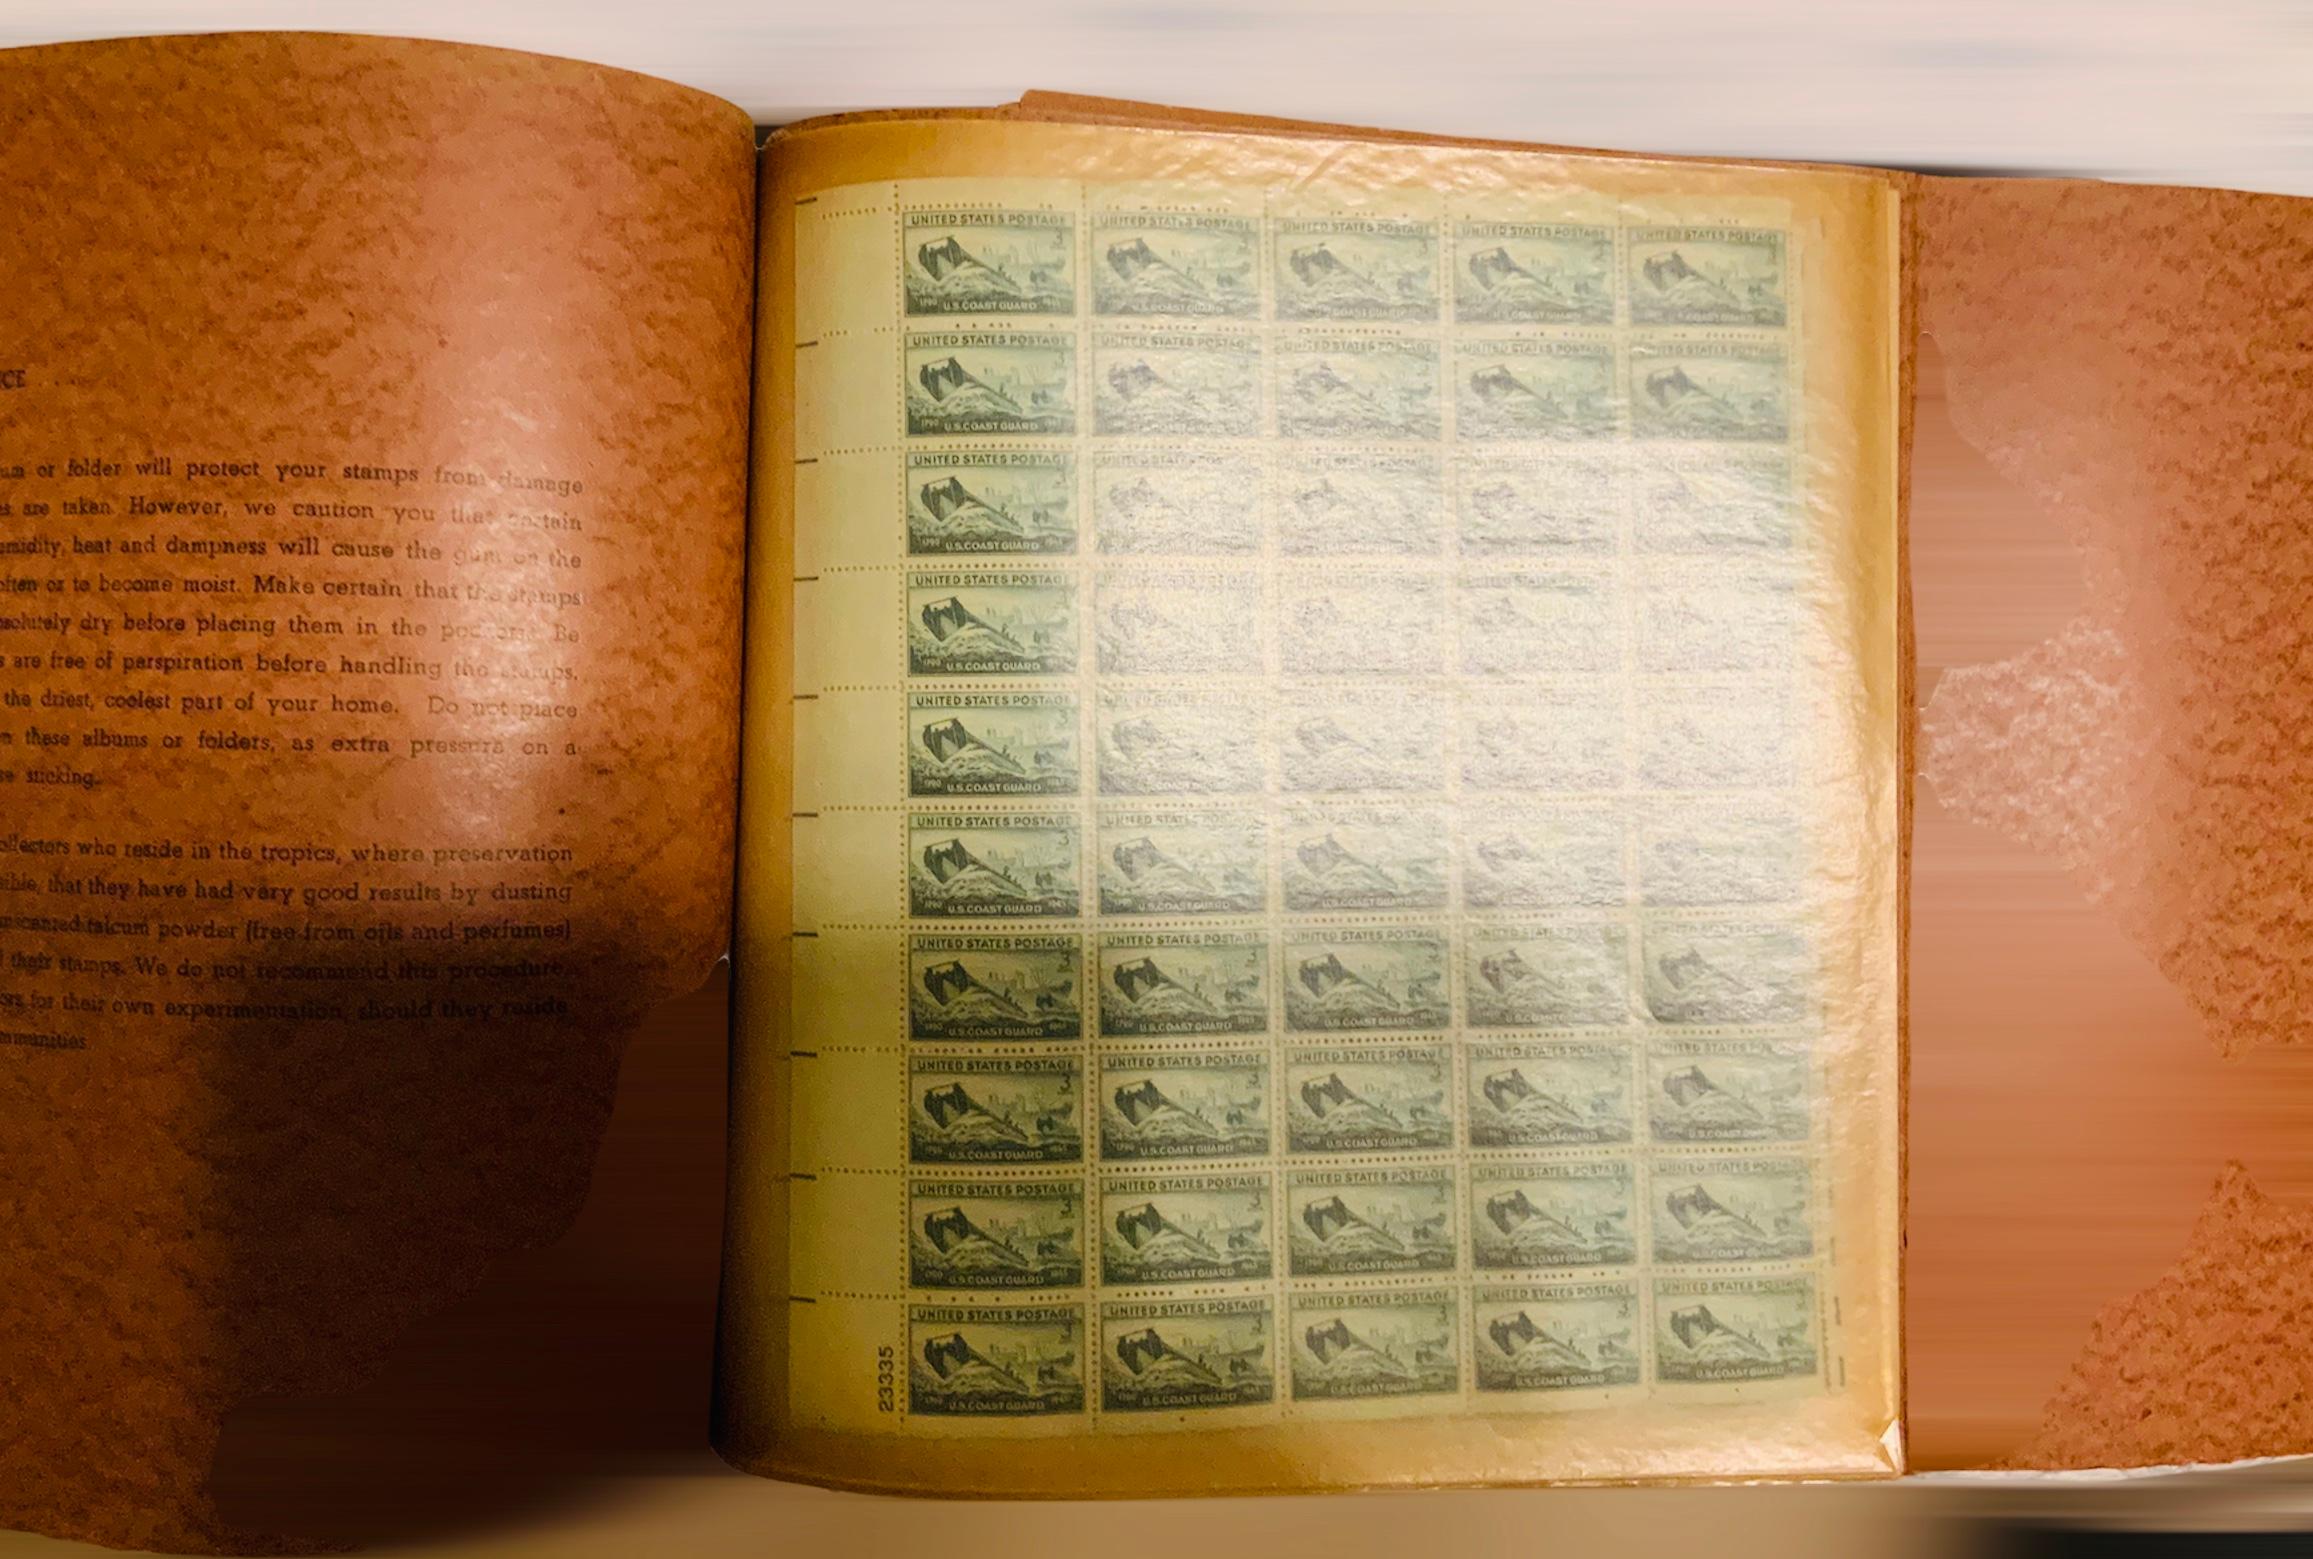 These are two Gimbels mint sheet album/binder of Stamps Collection. One album has nine brown folders/cover stocks and the other one has seven. Each folder contains between 17 to 20 mint sheets of stamps. The majority of the mint sheets of stamps